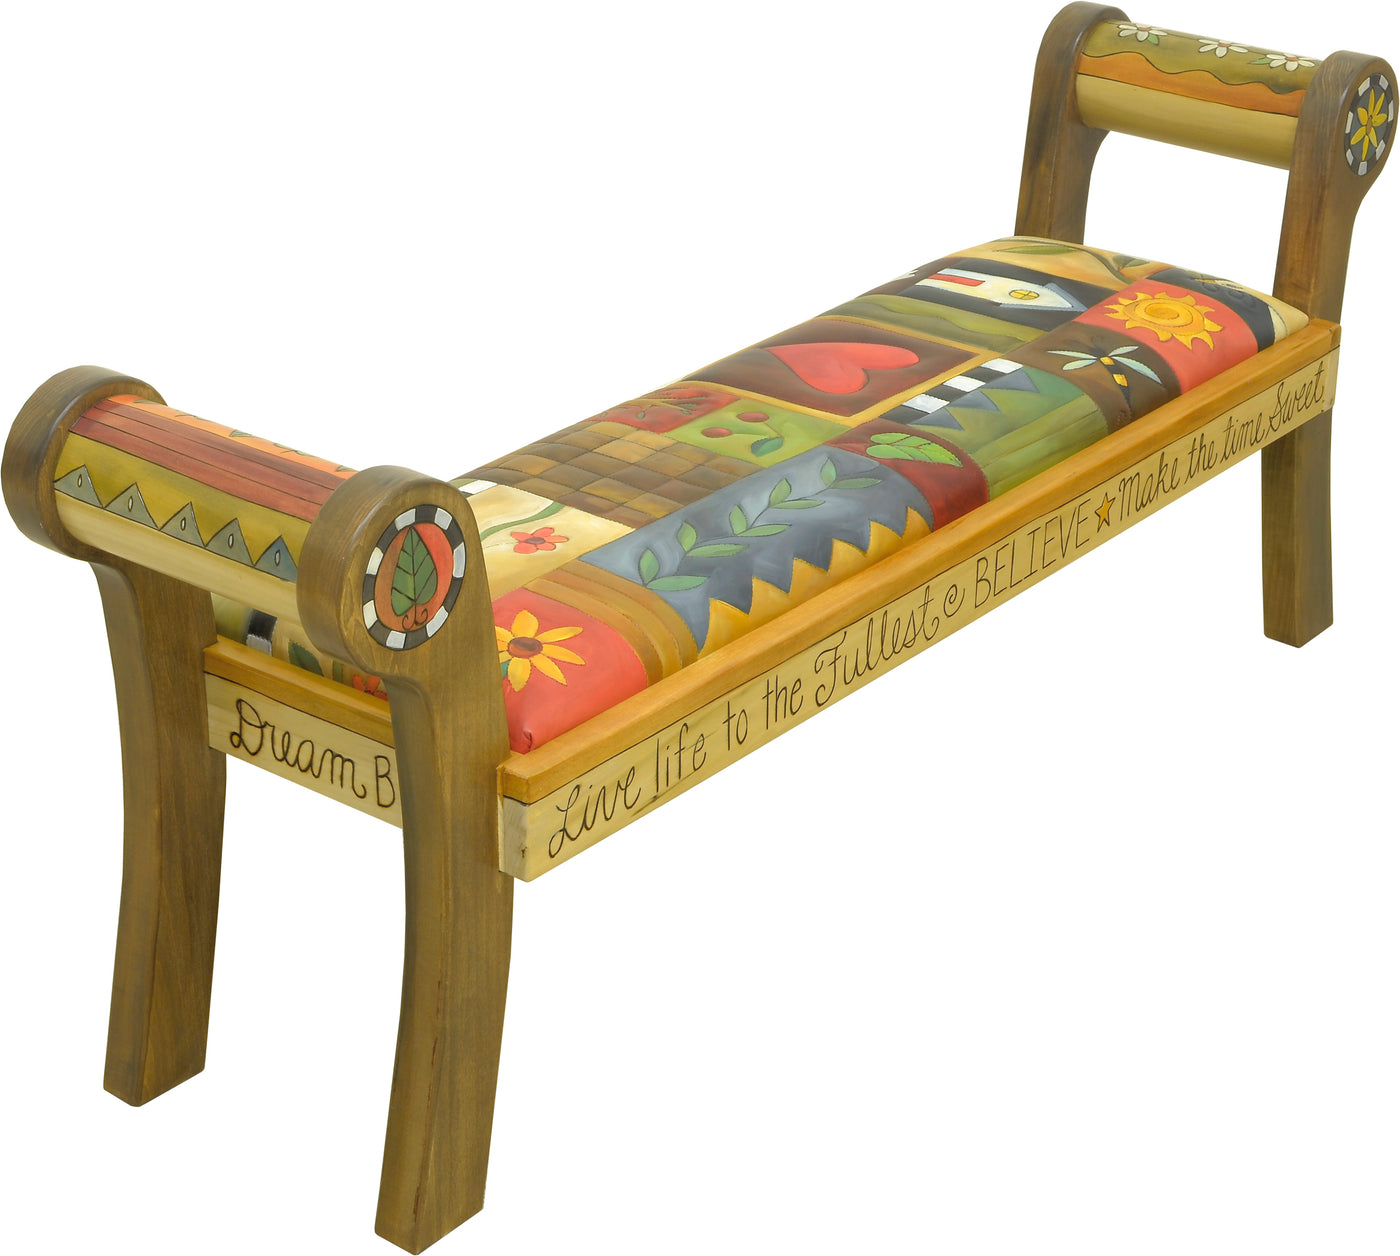 Rolled Arm Bench With Leather Seat D714119 Sticks Handmade